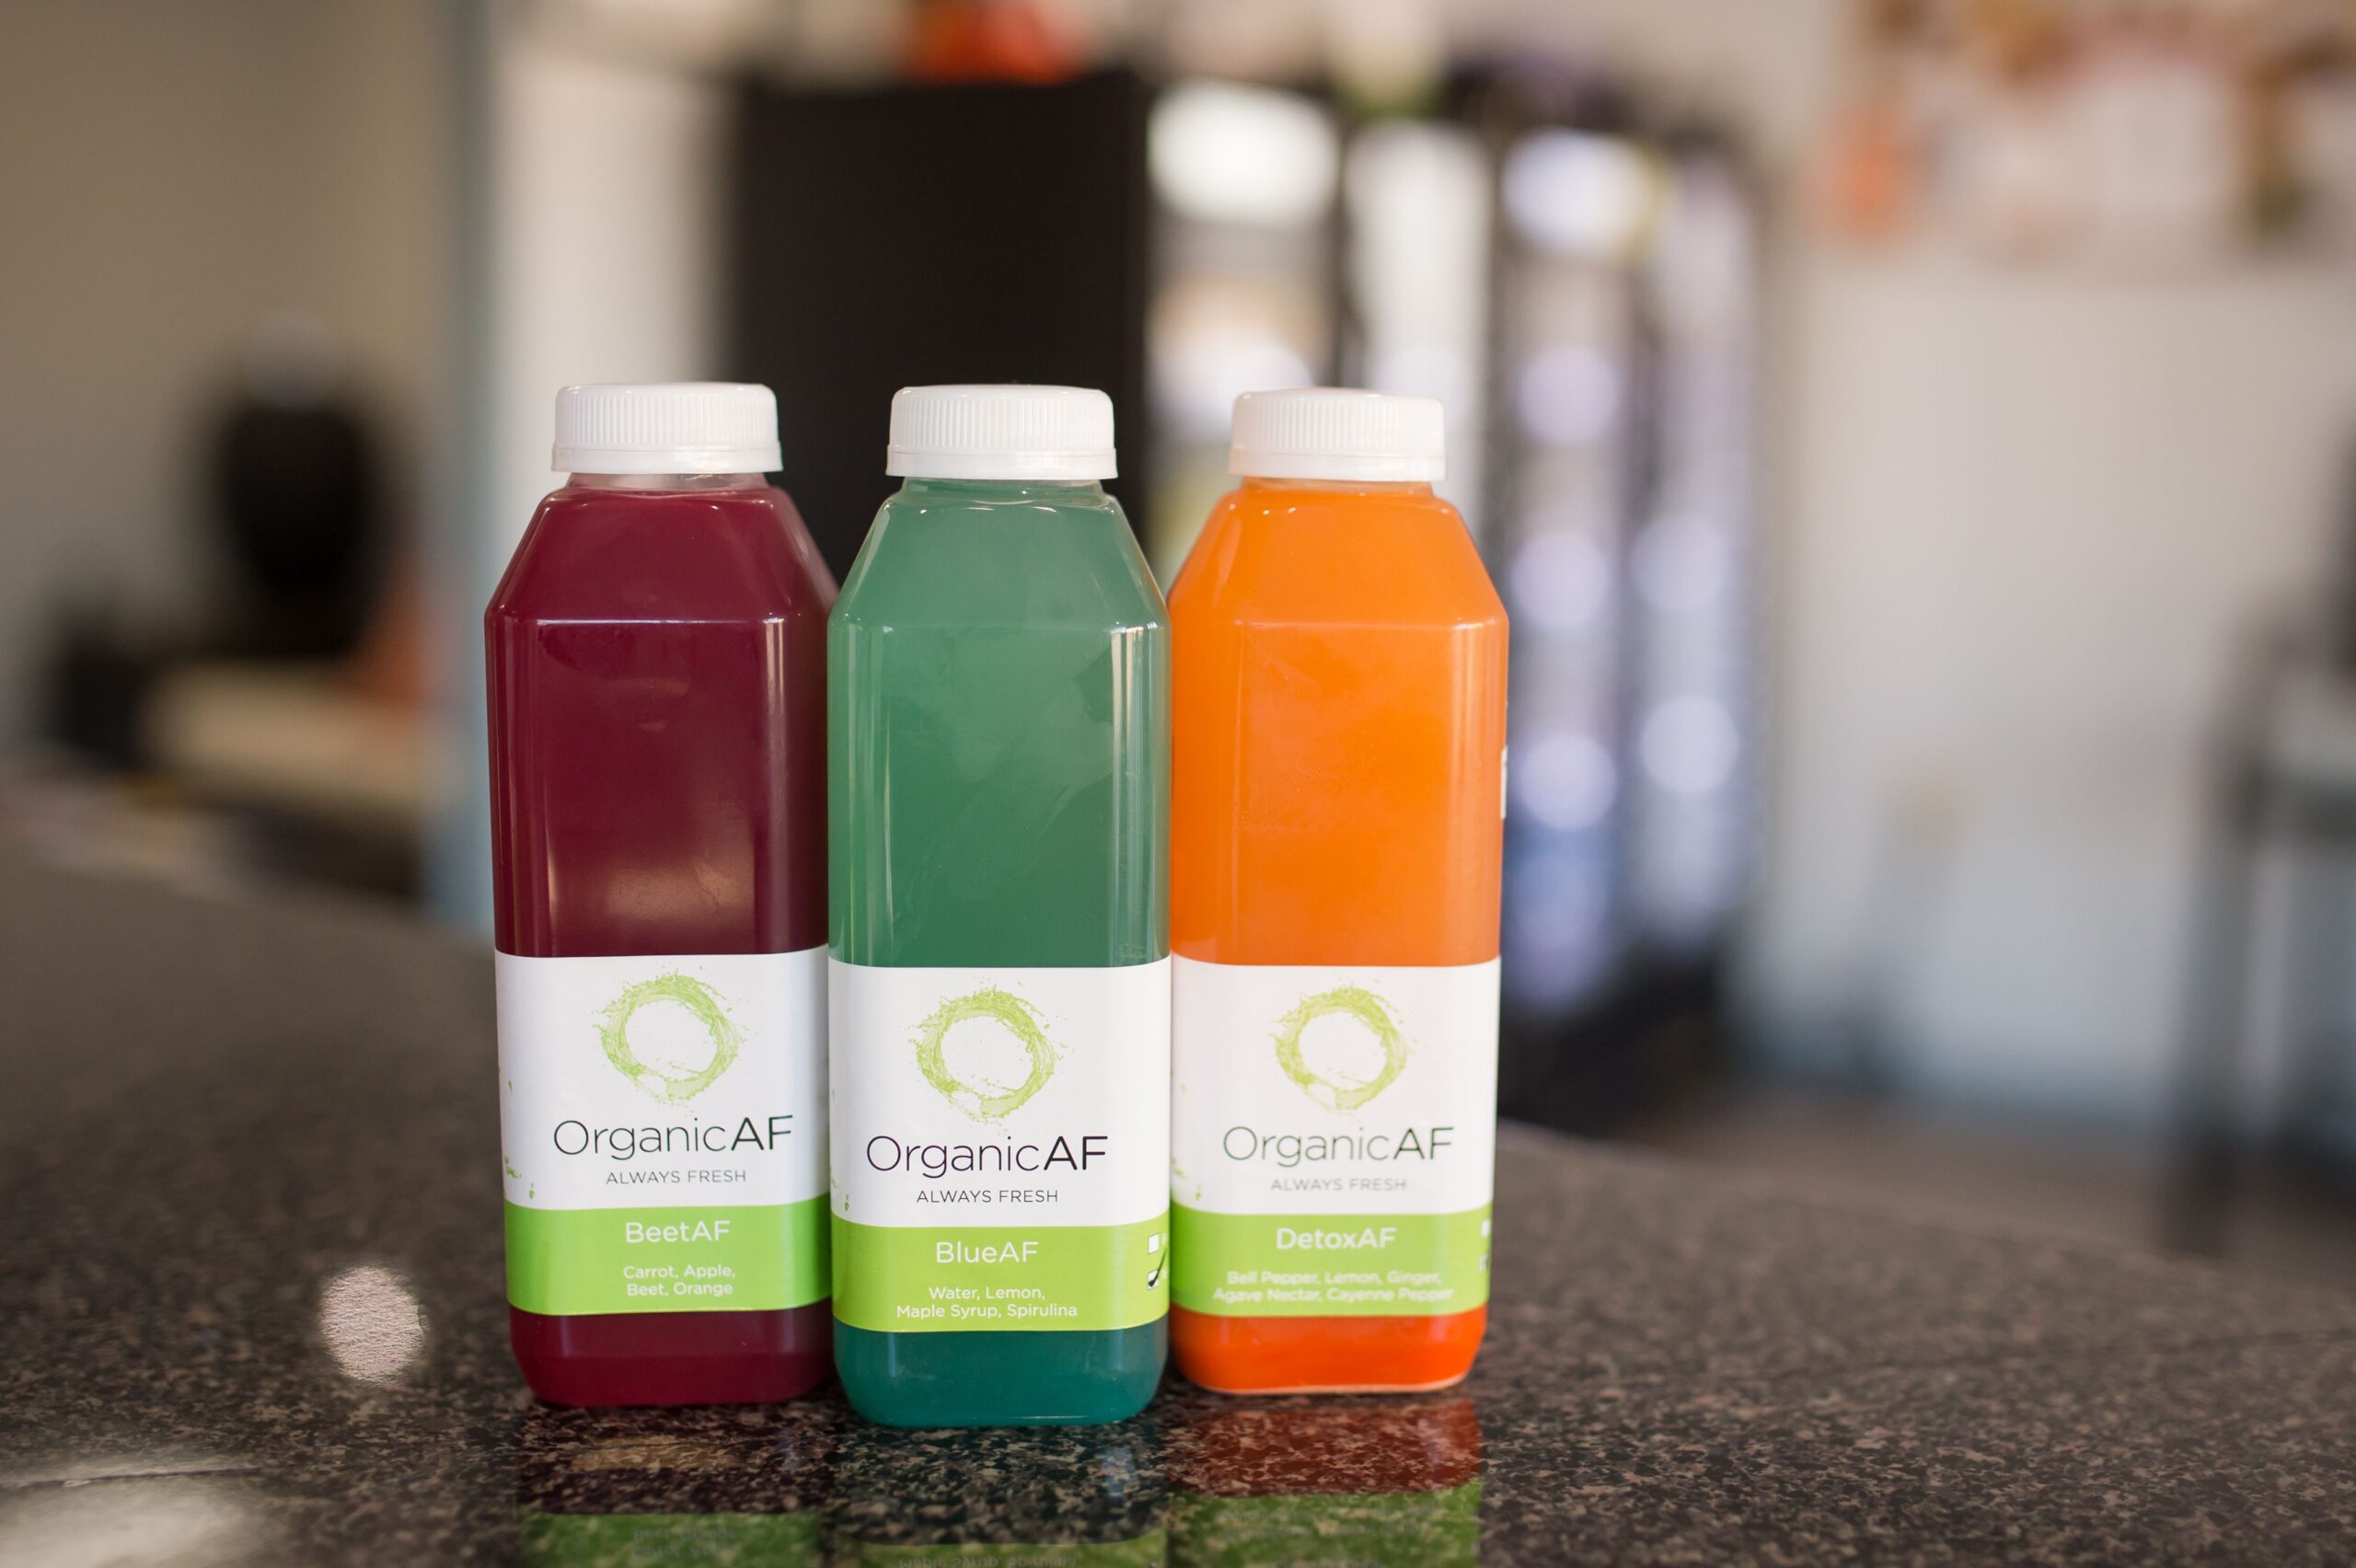 Three bottles of pressed juice from OrganicAF in High Point sit on a counter.